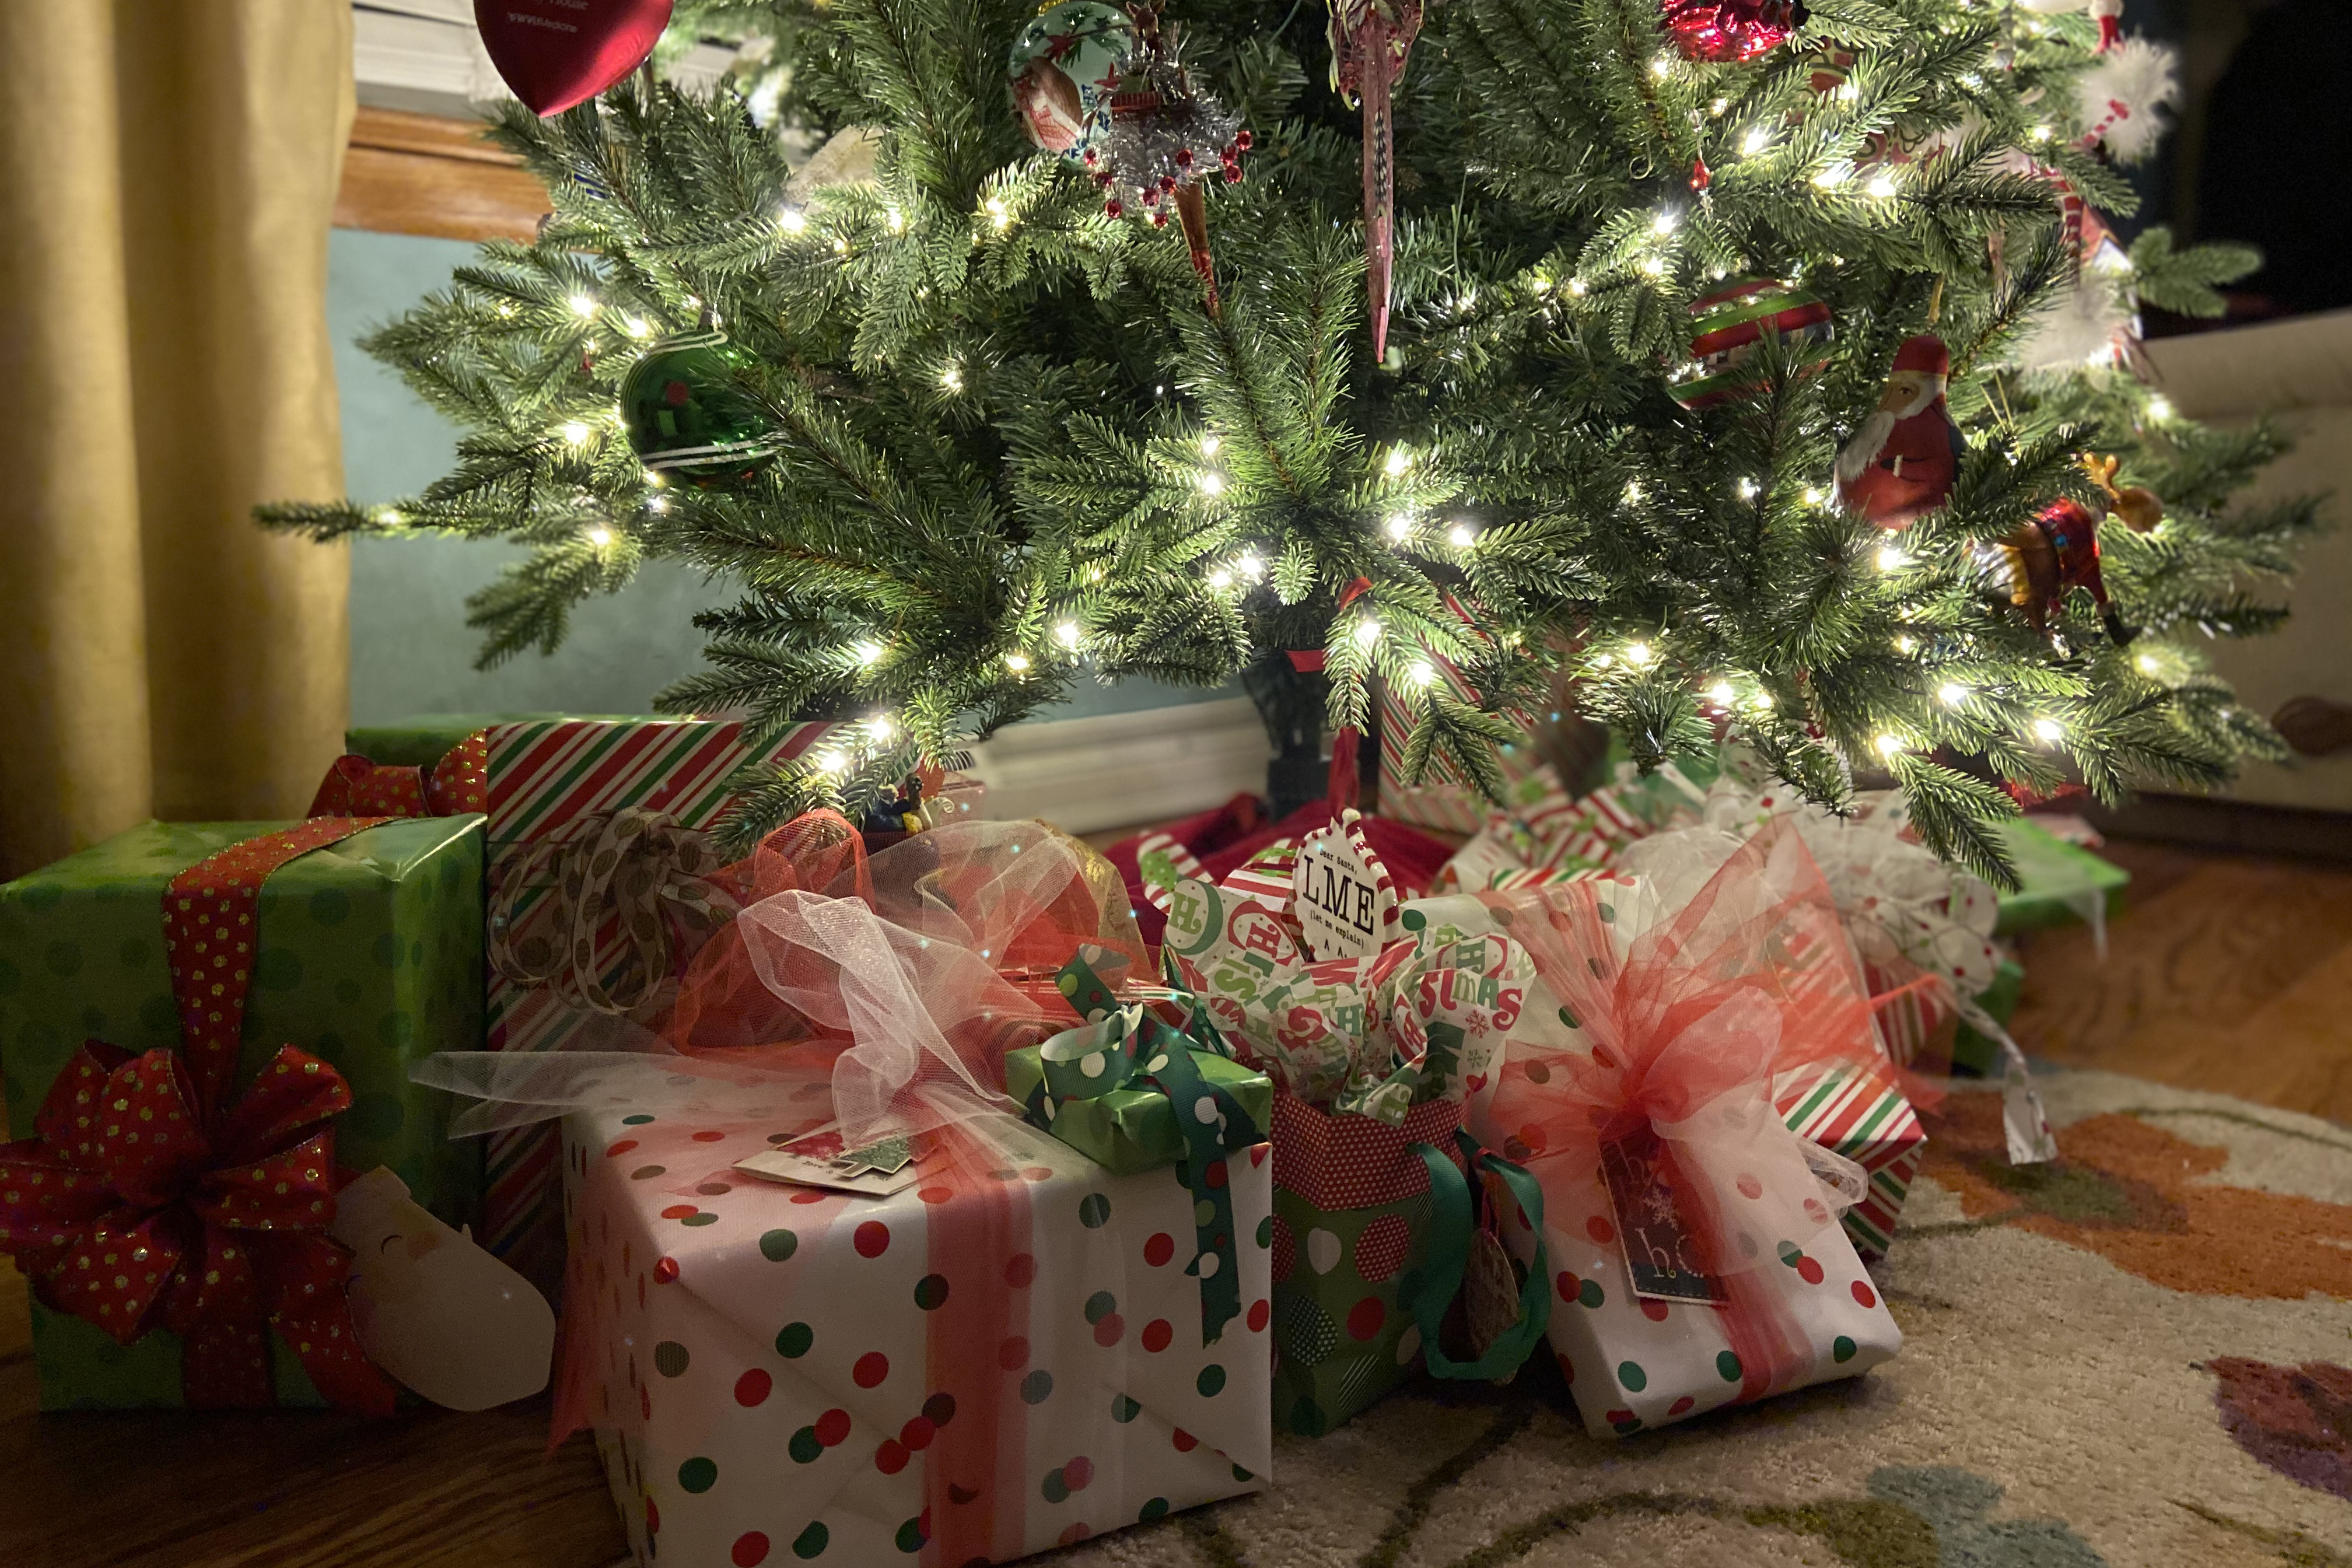 Photo of Christmas tree with presents underneath